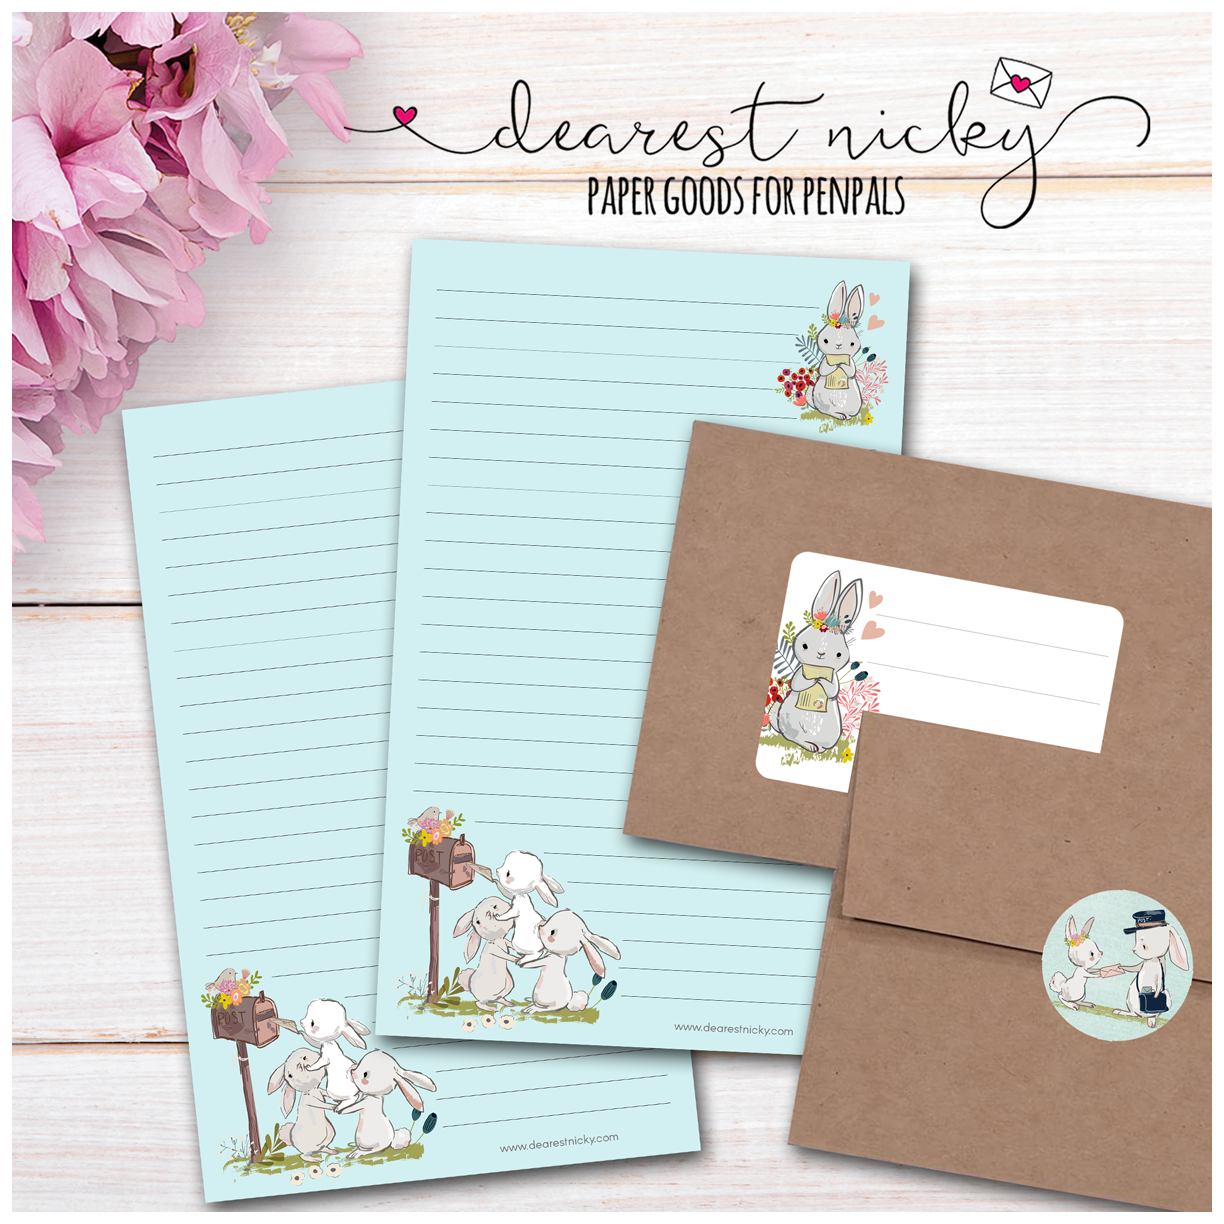 Snail Mail Bunny Mailing Address Labels - Set of 16